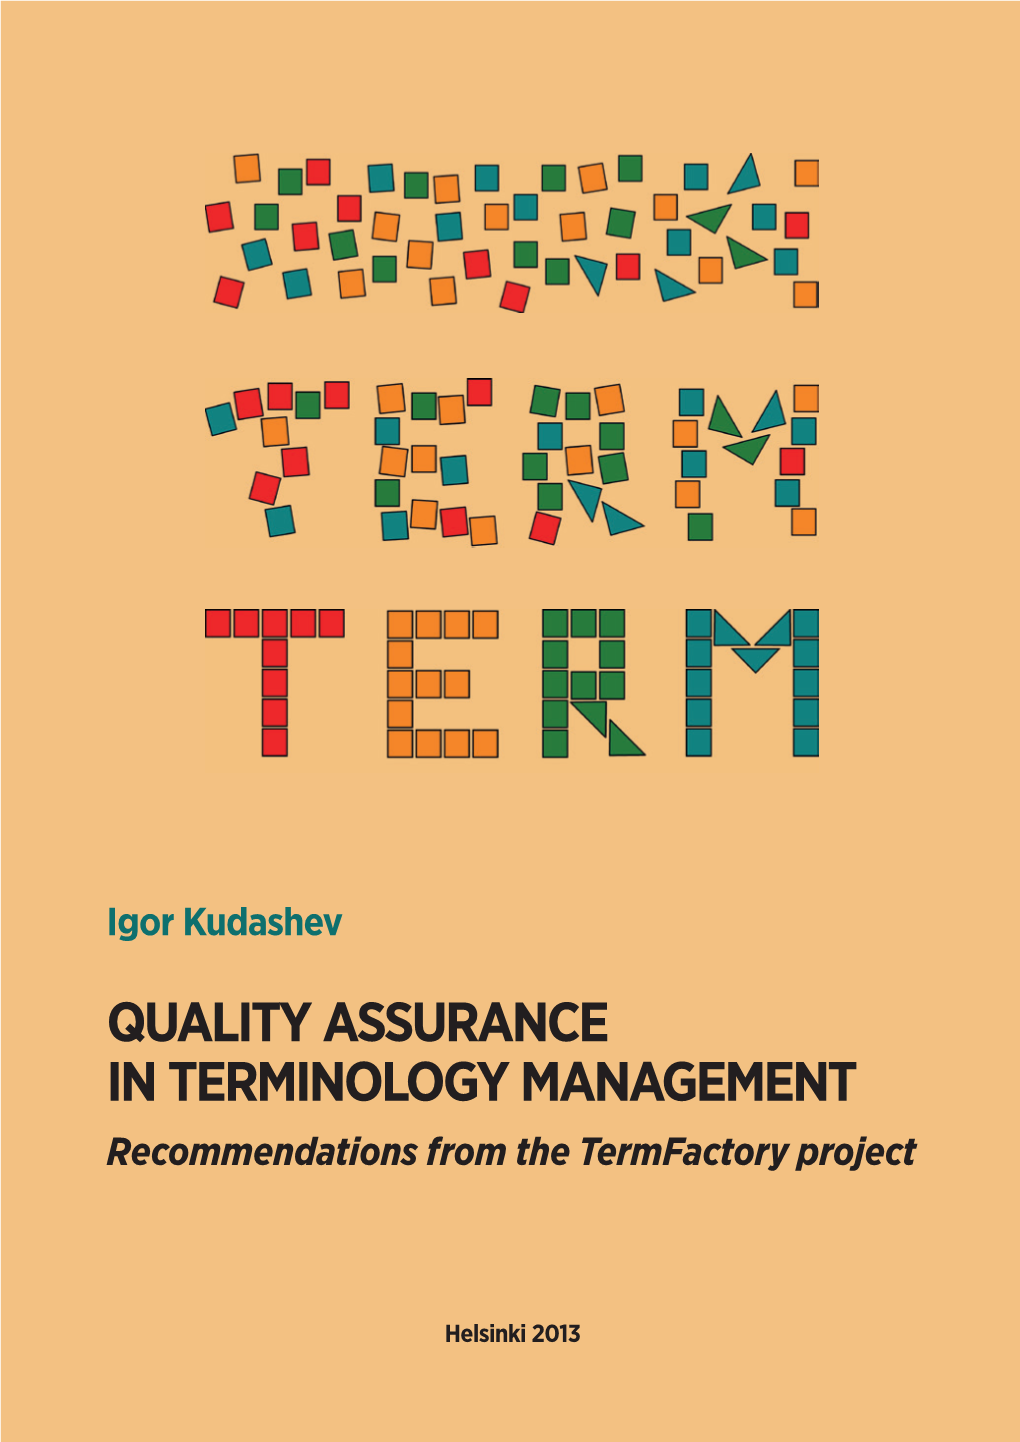 QUALITY ASSURANCE in TERMINOLOGY MANAGEMENT Recommendations from the Termfactory Project